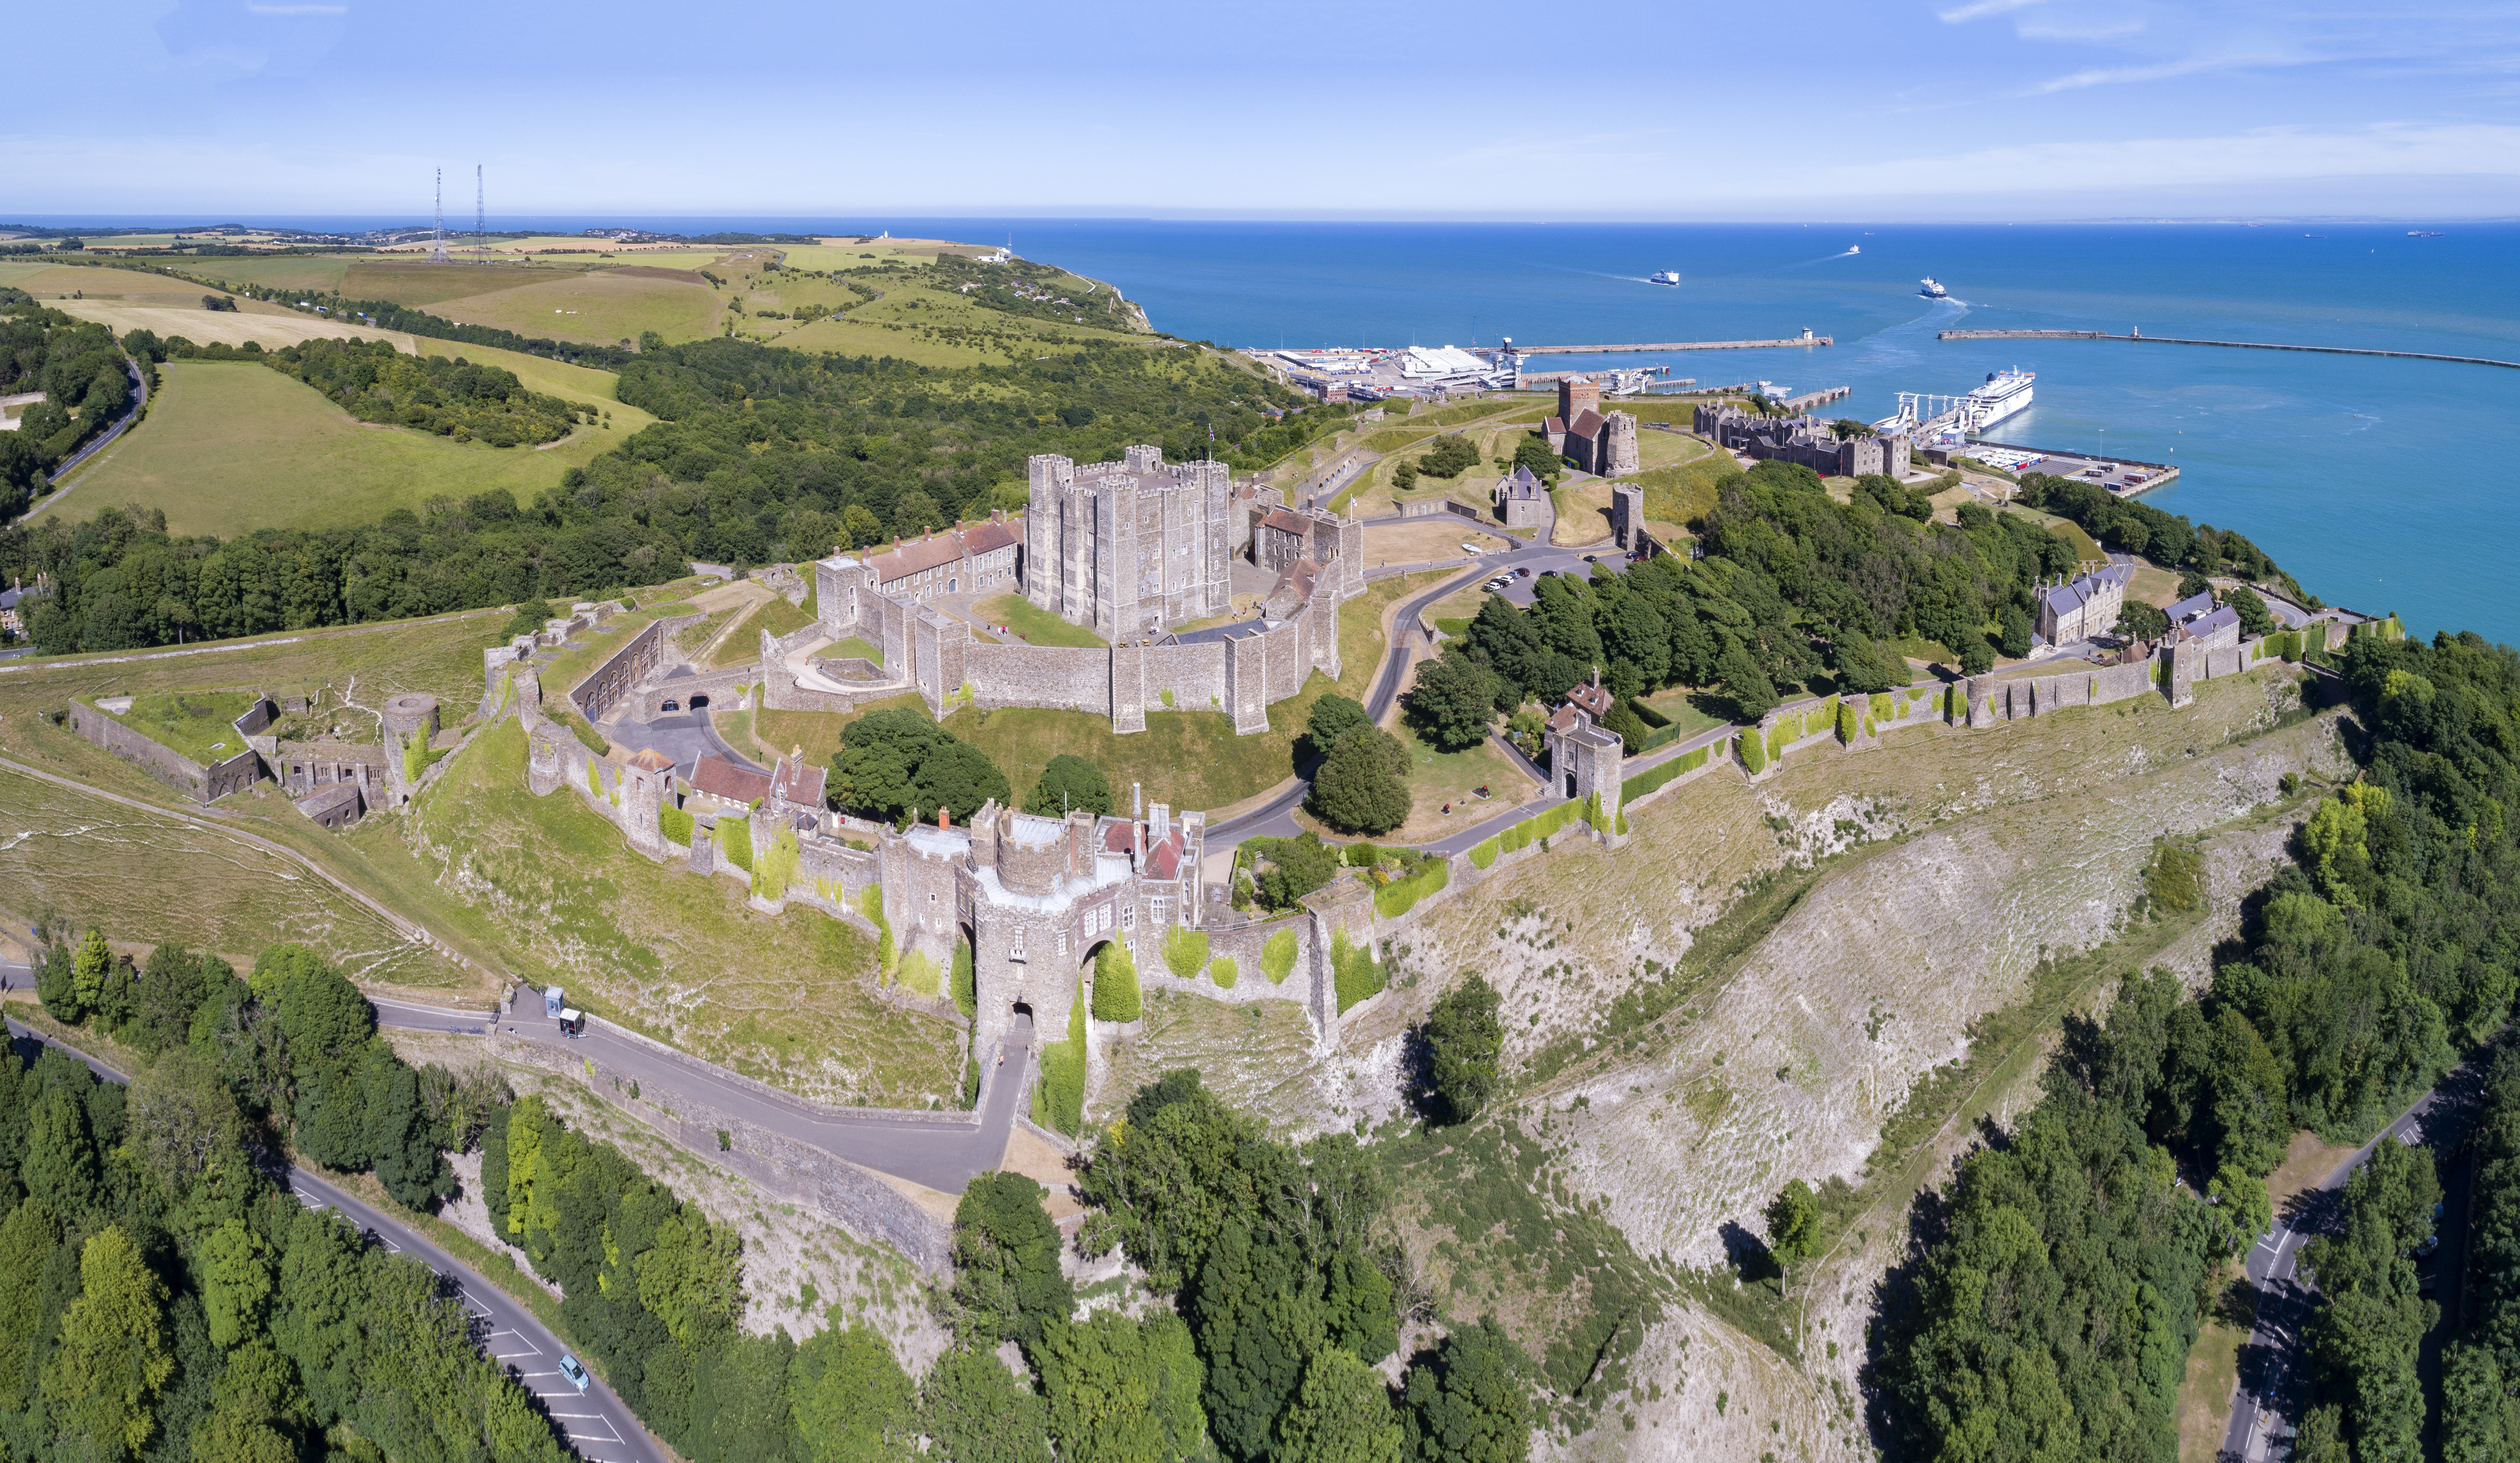 File:1 dover castle aerial panorama 2017.jpg - Wikimedia Commons